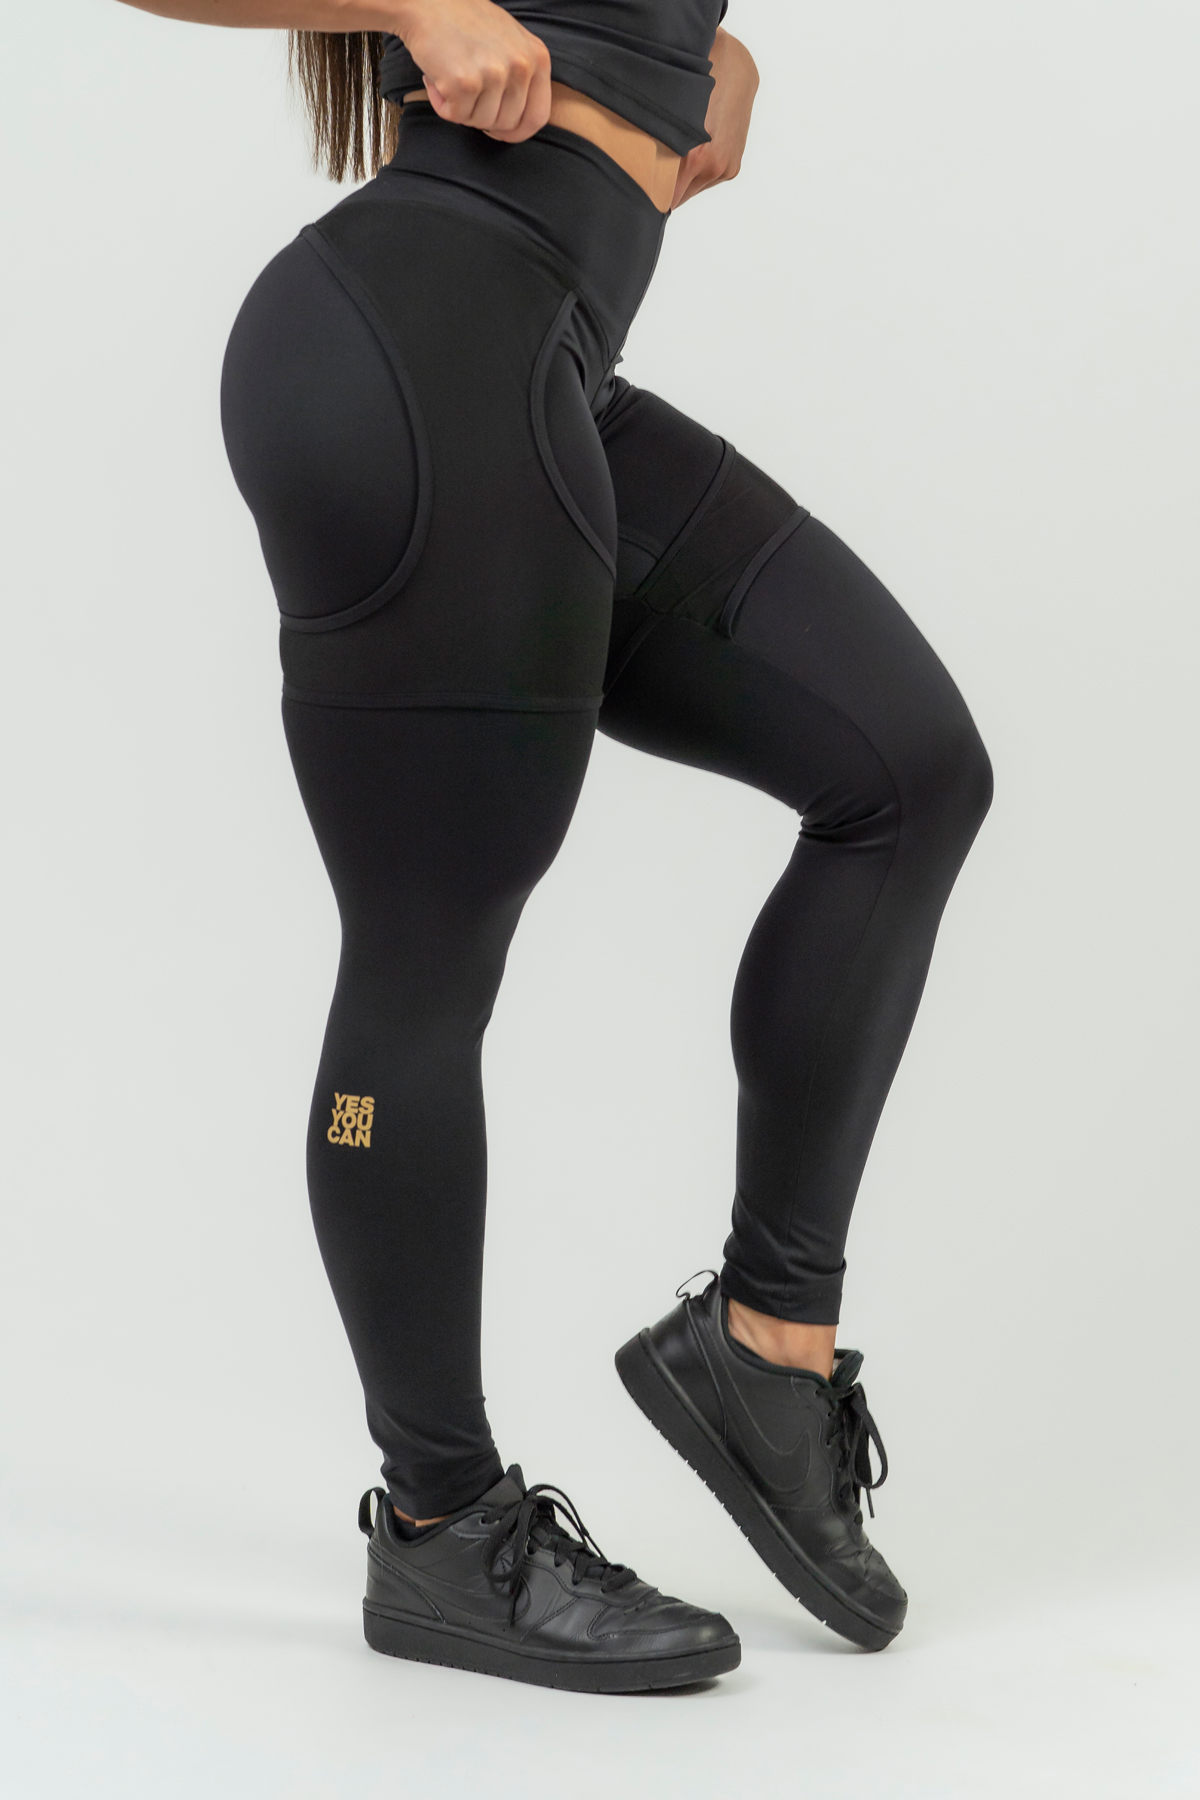 Little Black Thermal Running Tights – Coeur Sports